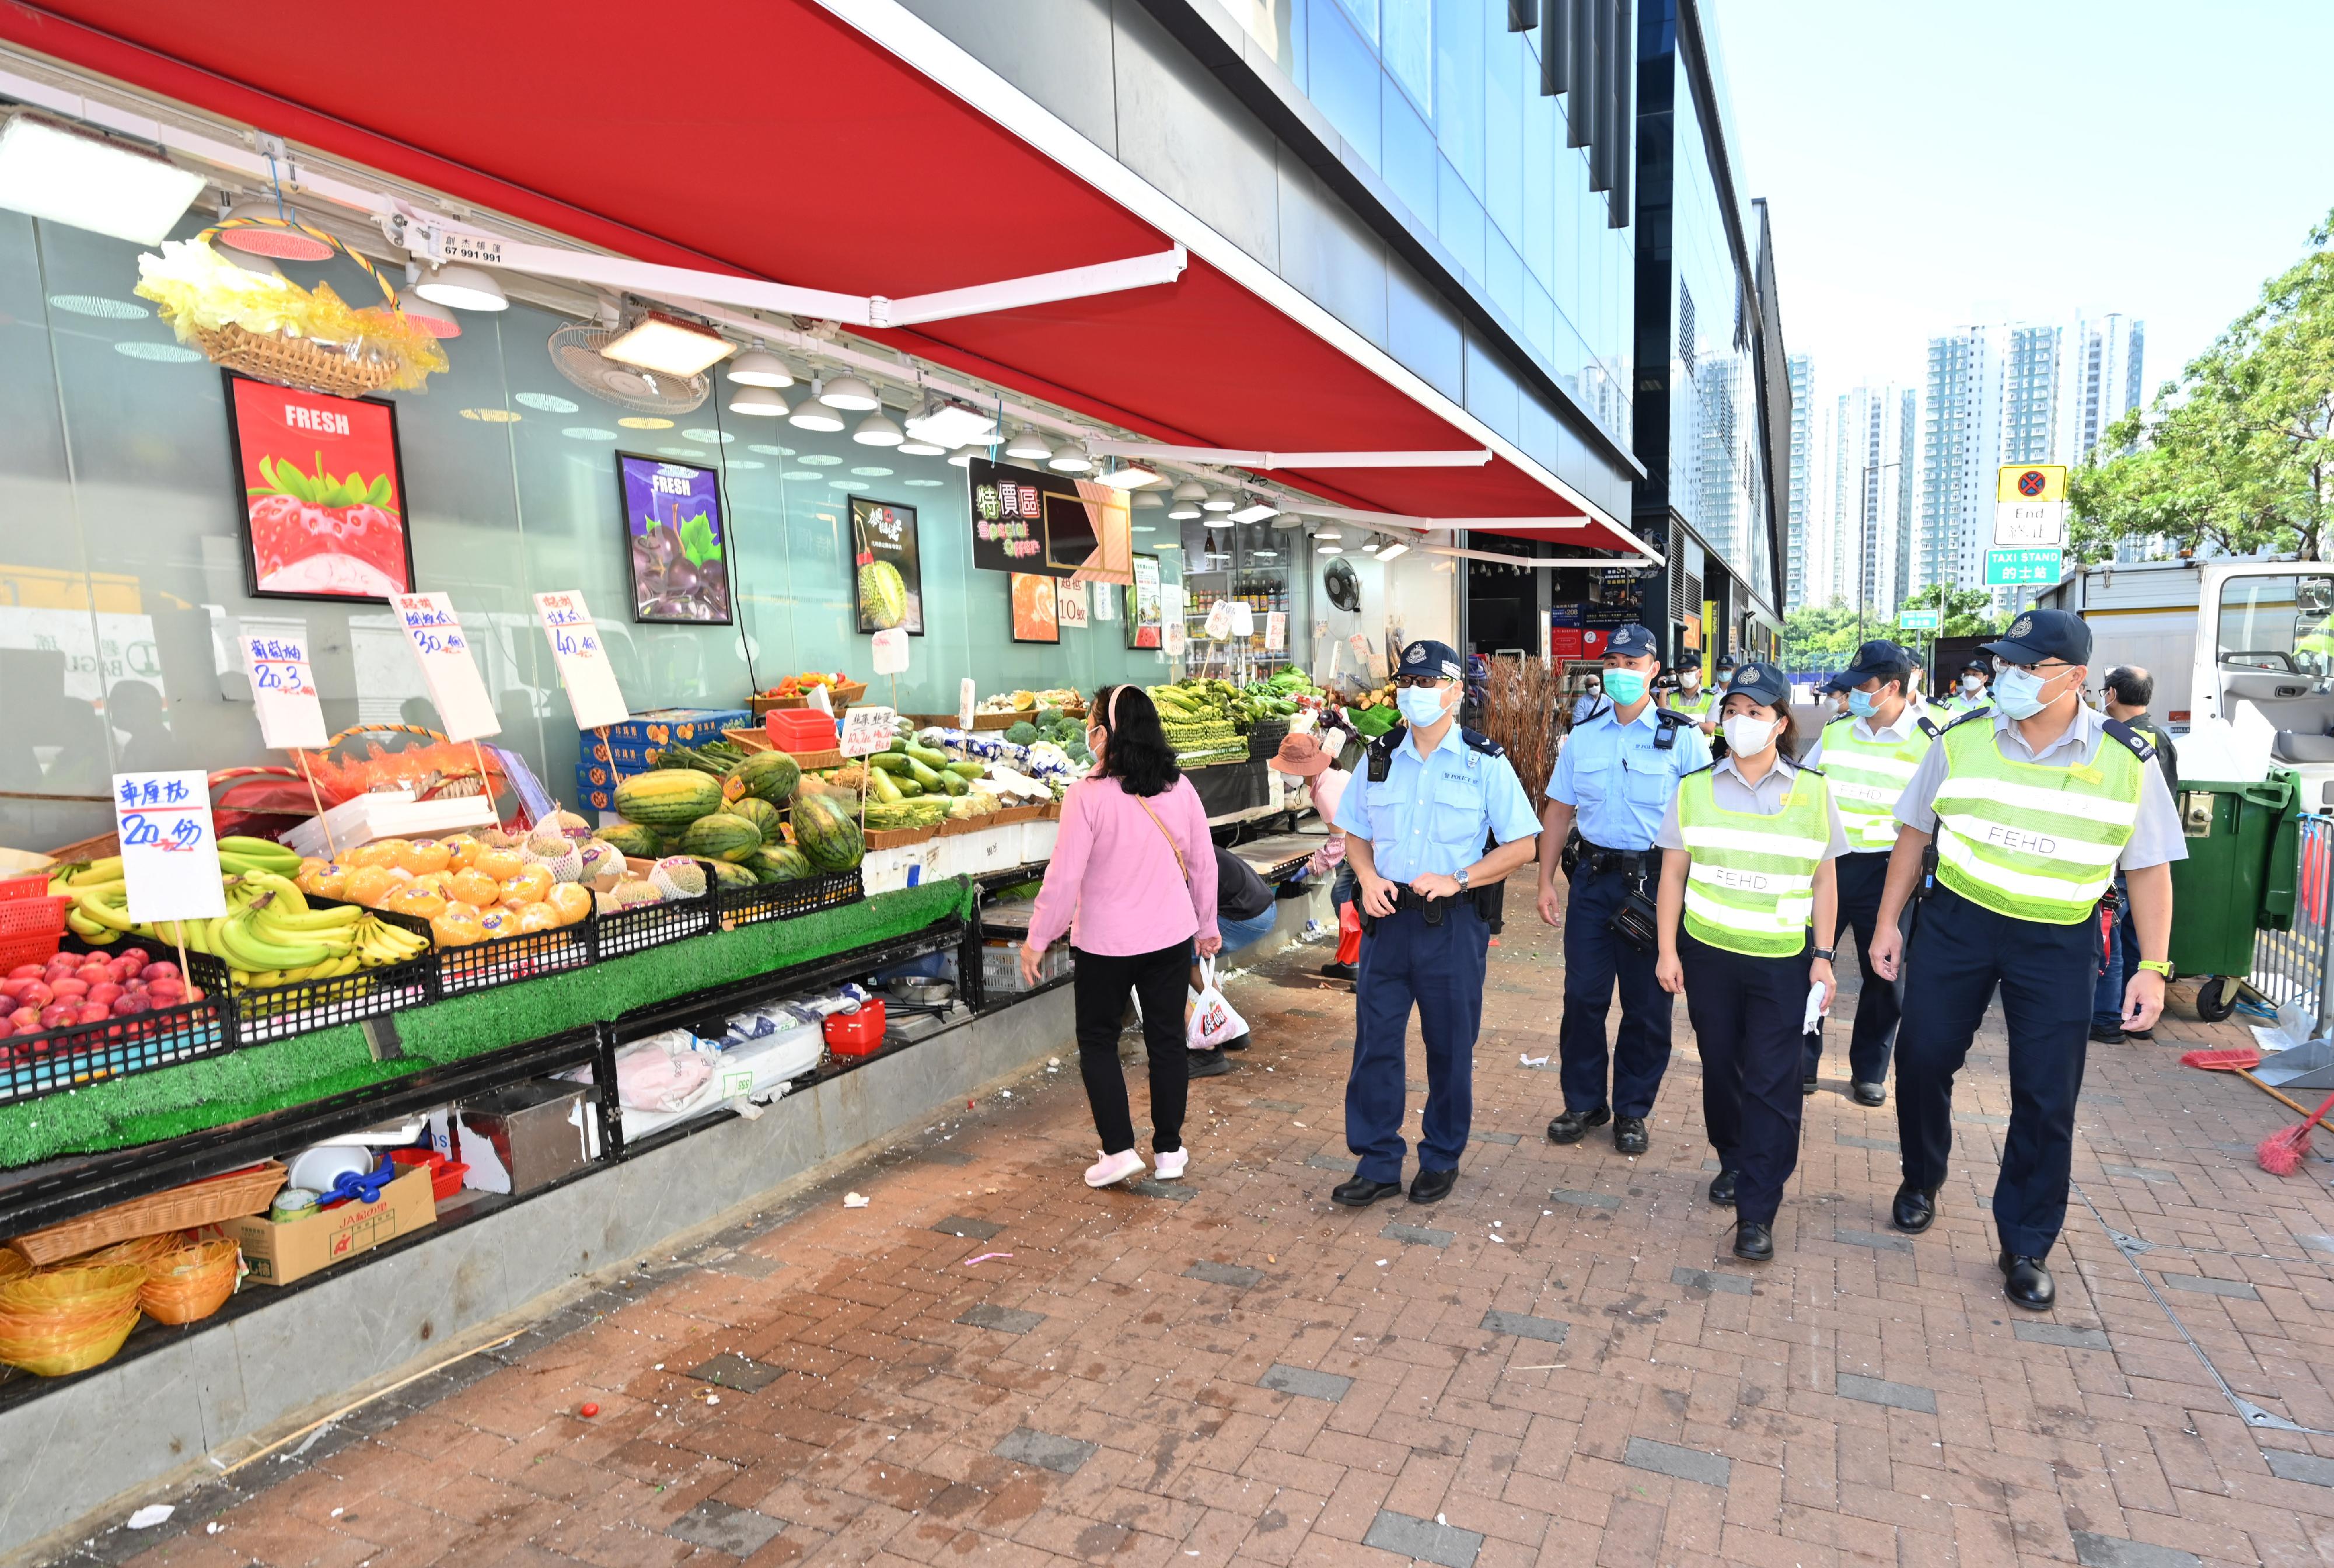 A spokesman for the Food and Environmental Hygiene Department (FEHD) said today (October 17) that the FEHD and the Hong Kong Police Force have conducted a series of stringent enforcement actions against illegal shop front extension activities in various districts since October 3. Photo shows officers of the FEHD and the Police conducting a joint operation in Sha Tin District earlier.